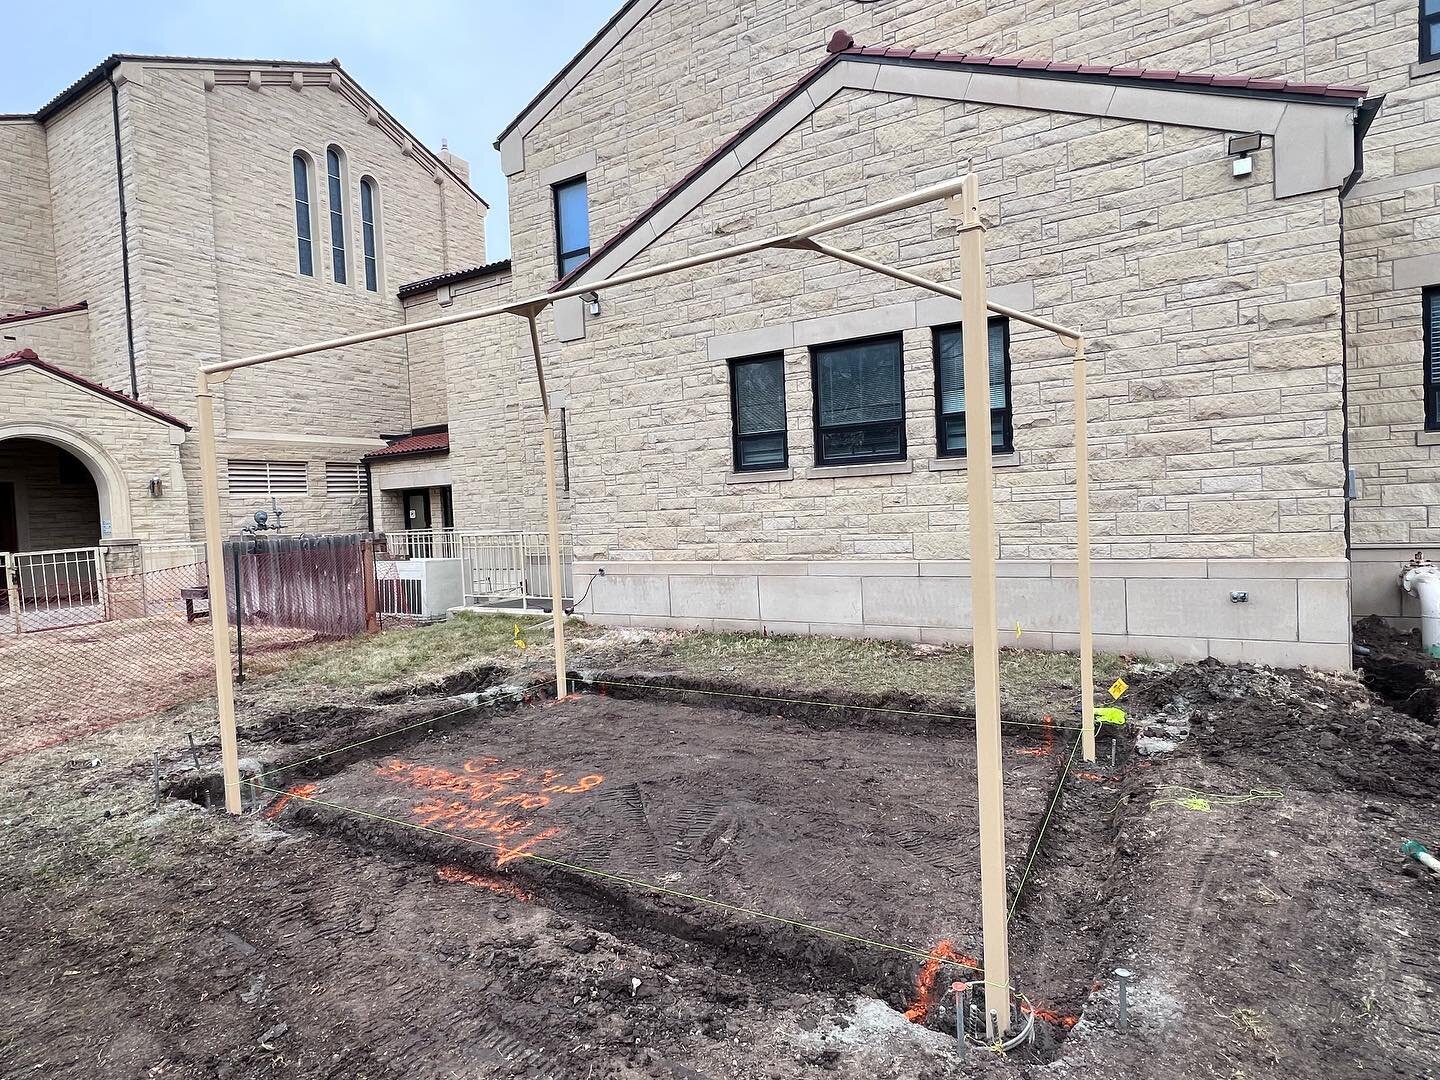 Shade Structure at East Heights Methodist Church. This will get a concrete curb poured and we will lay artificial turf inside the border. We will post some final photos when it&rsquo;s completed.